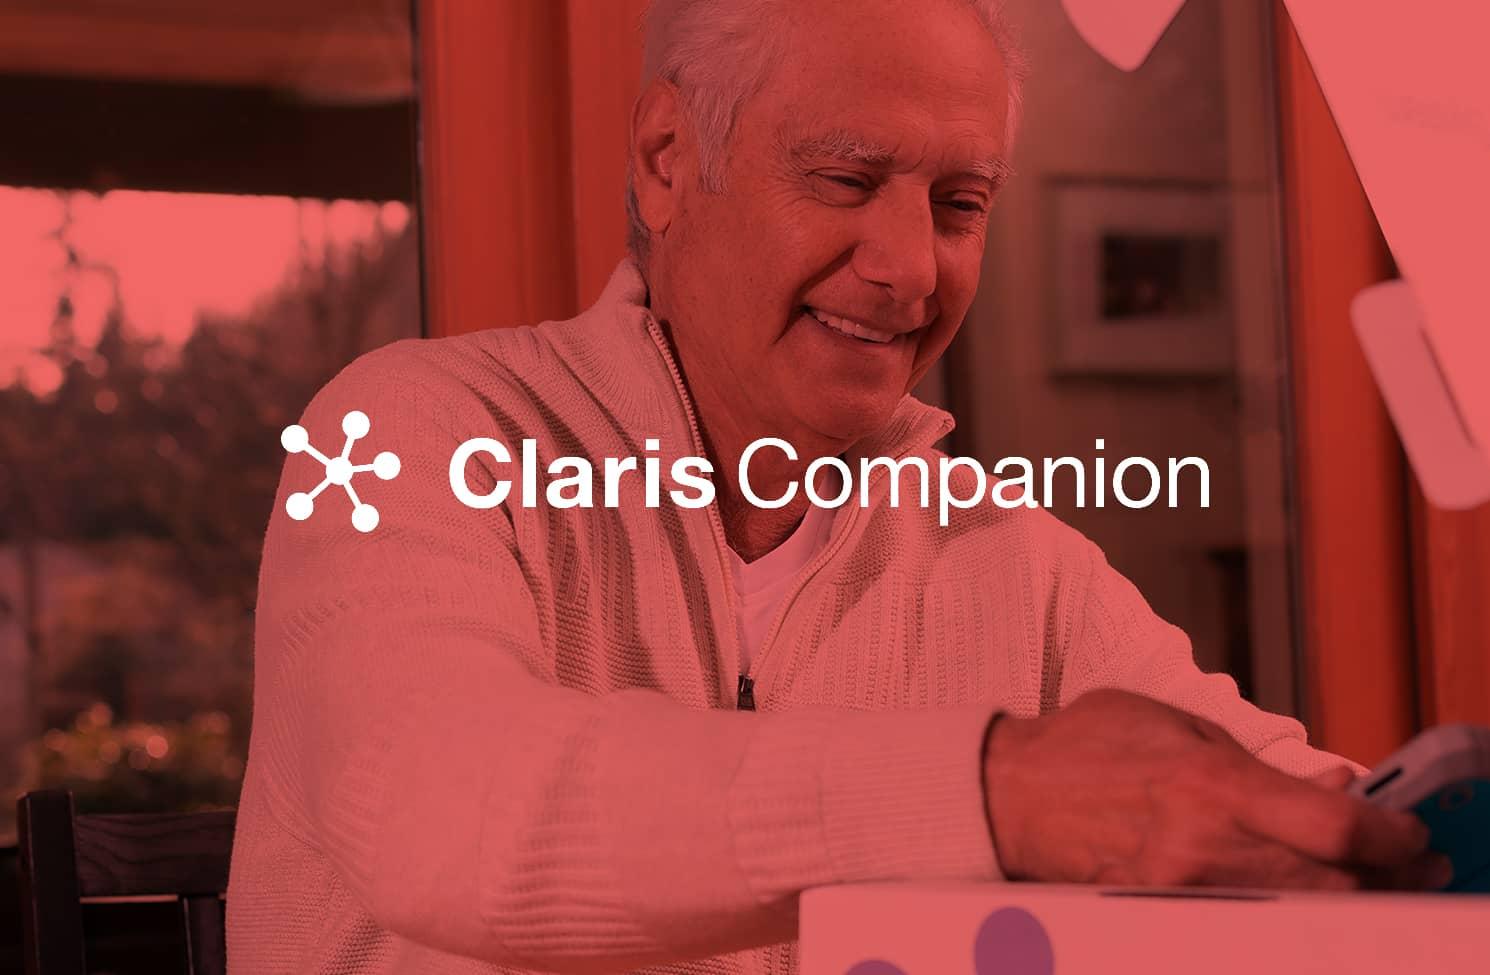 Product Interfaith Community Services Uses Claris Companion Tablet Technology to Improve the Social Connections of Seniors at Home - Claris Healthcare image